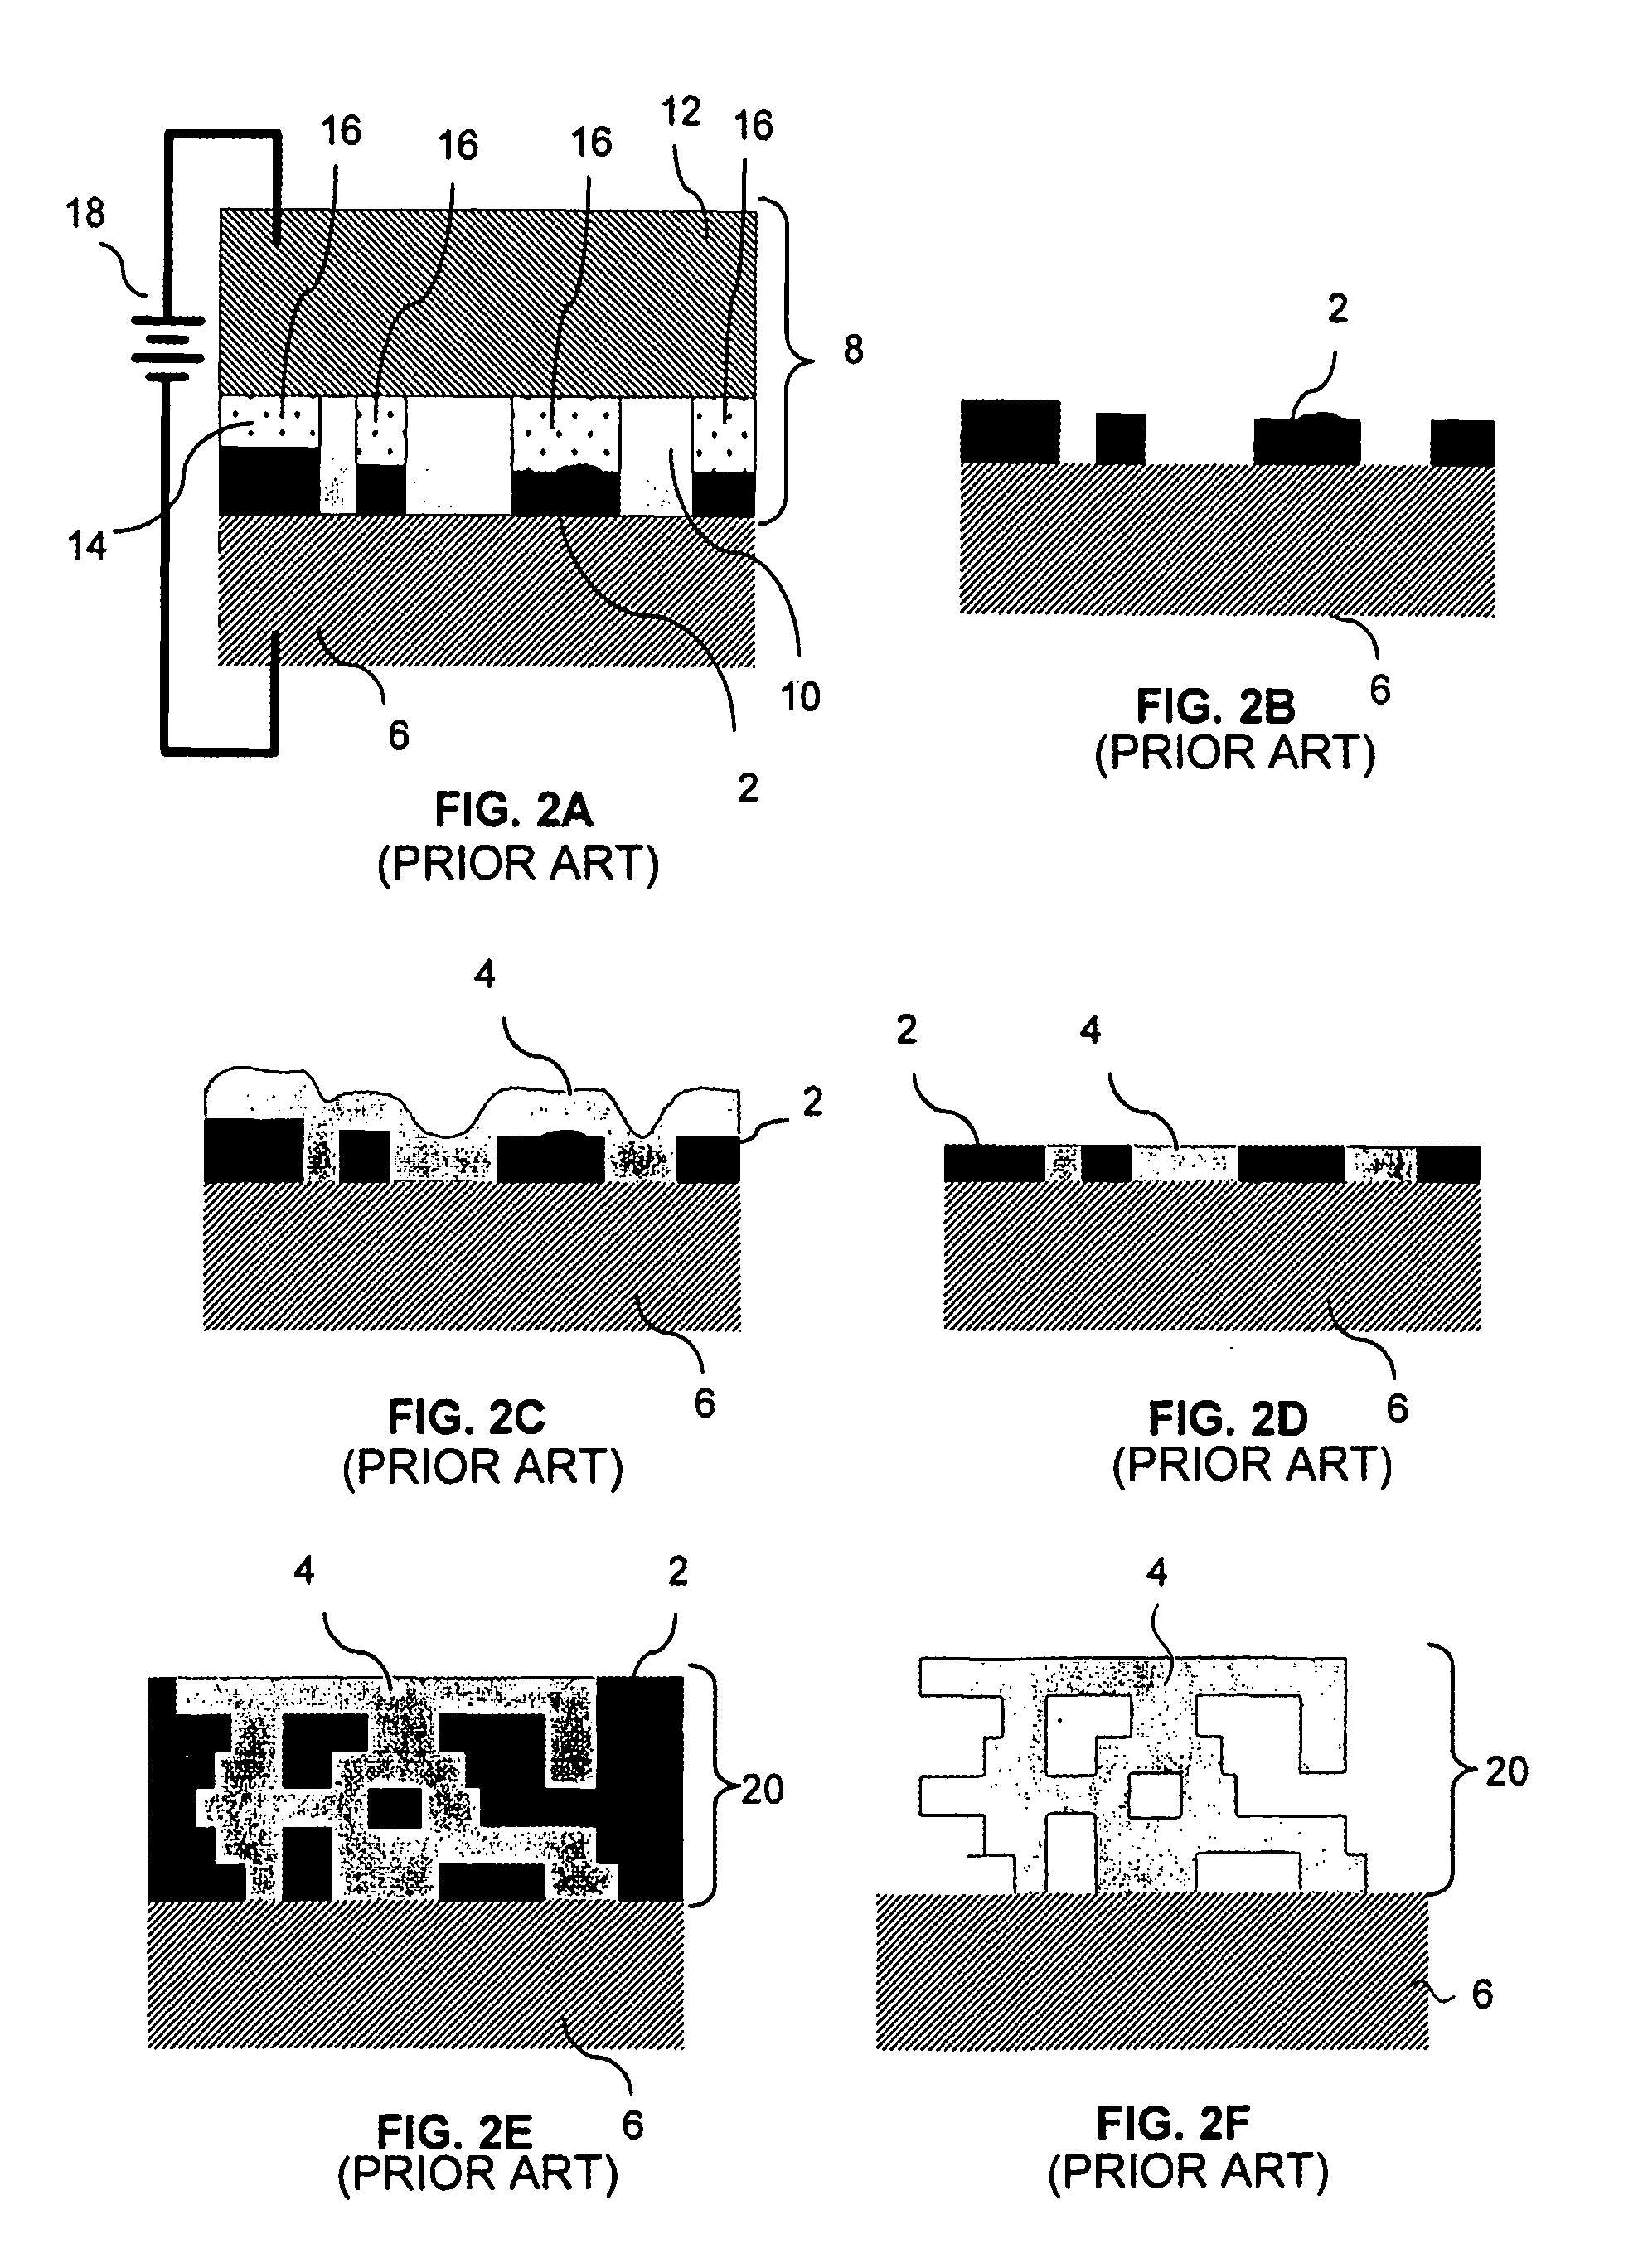 Electrochemical fabrication methods including use of surface treatments to reduce overplating and/or planarization during formation of multi-layer three-dimensional structures